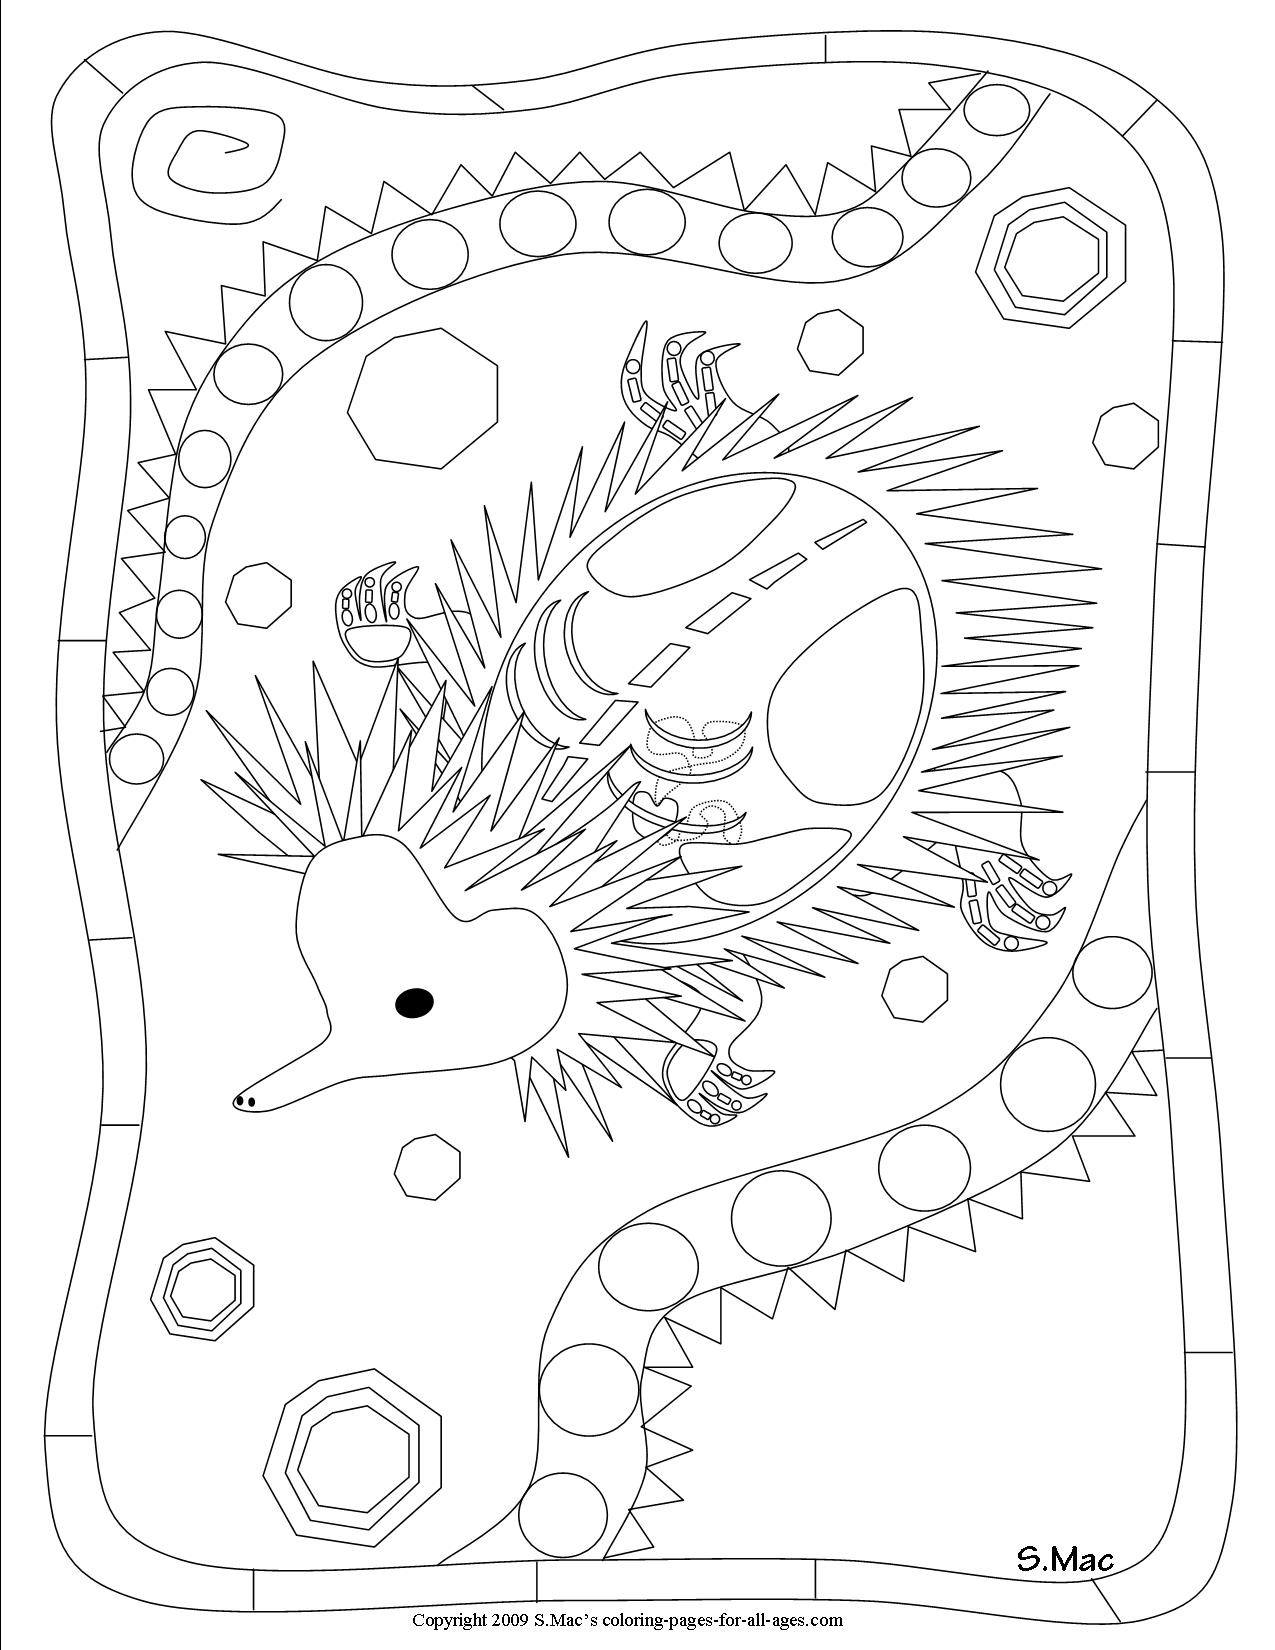 X-ray Art Coloring Pages – S.Mac's Place to Be